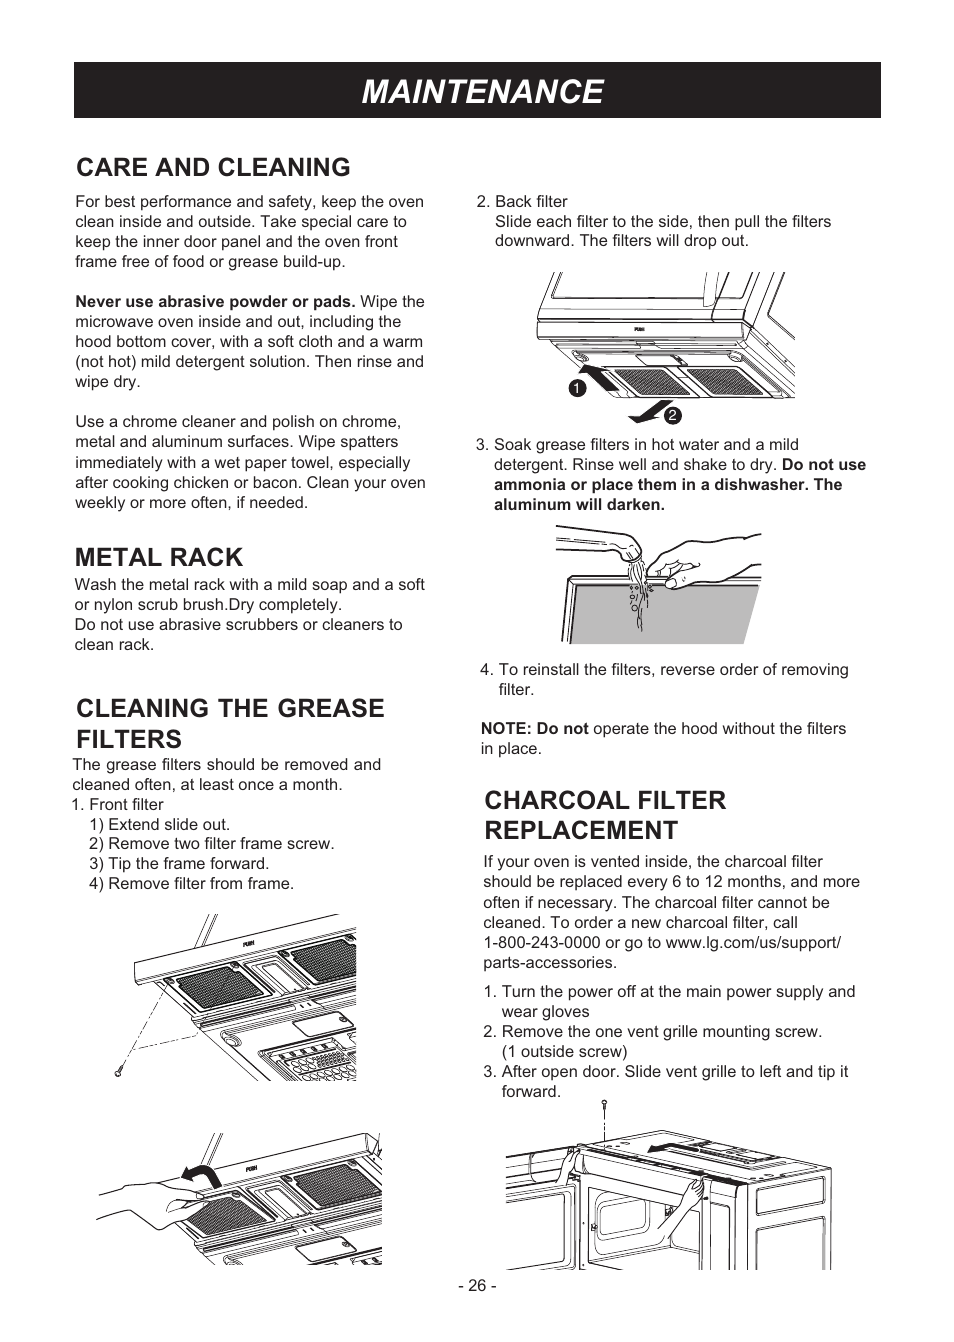 Maintenance, Care and cleaning, Metal rack LG LMHM2237ST User Manual Page 26 / 32